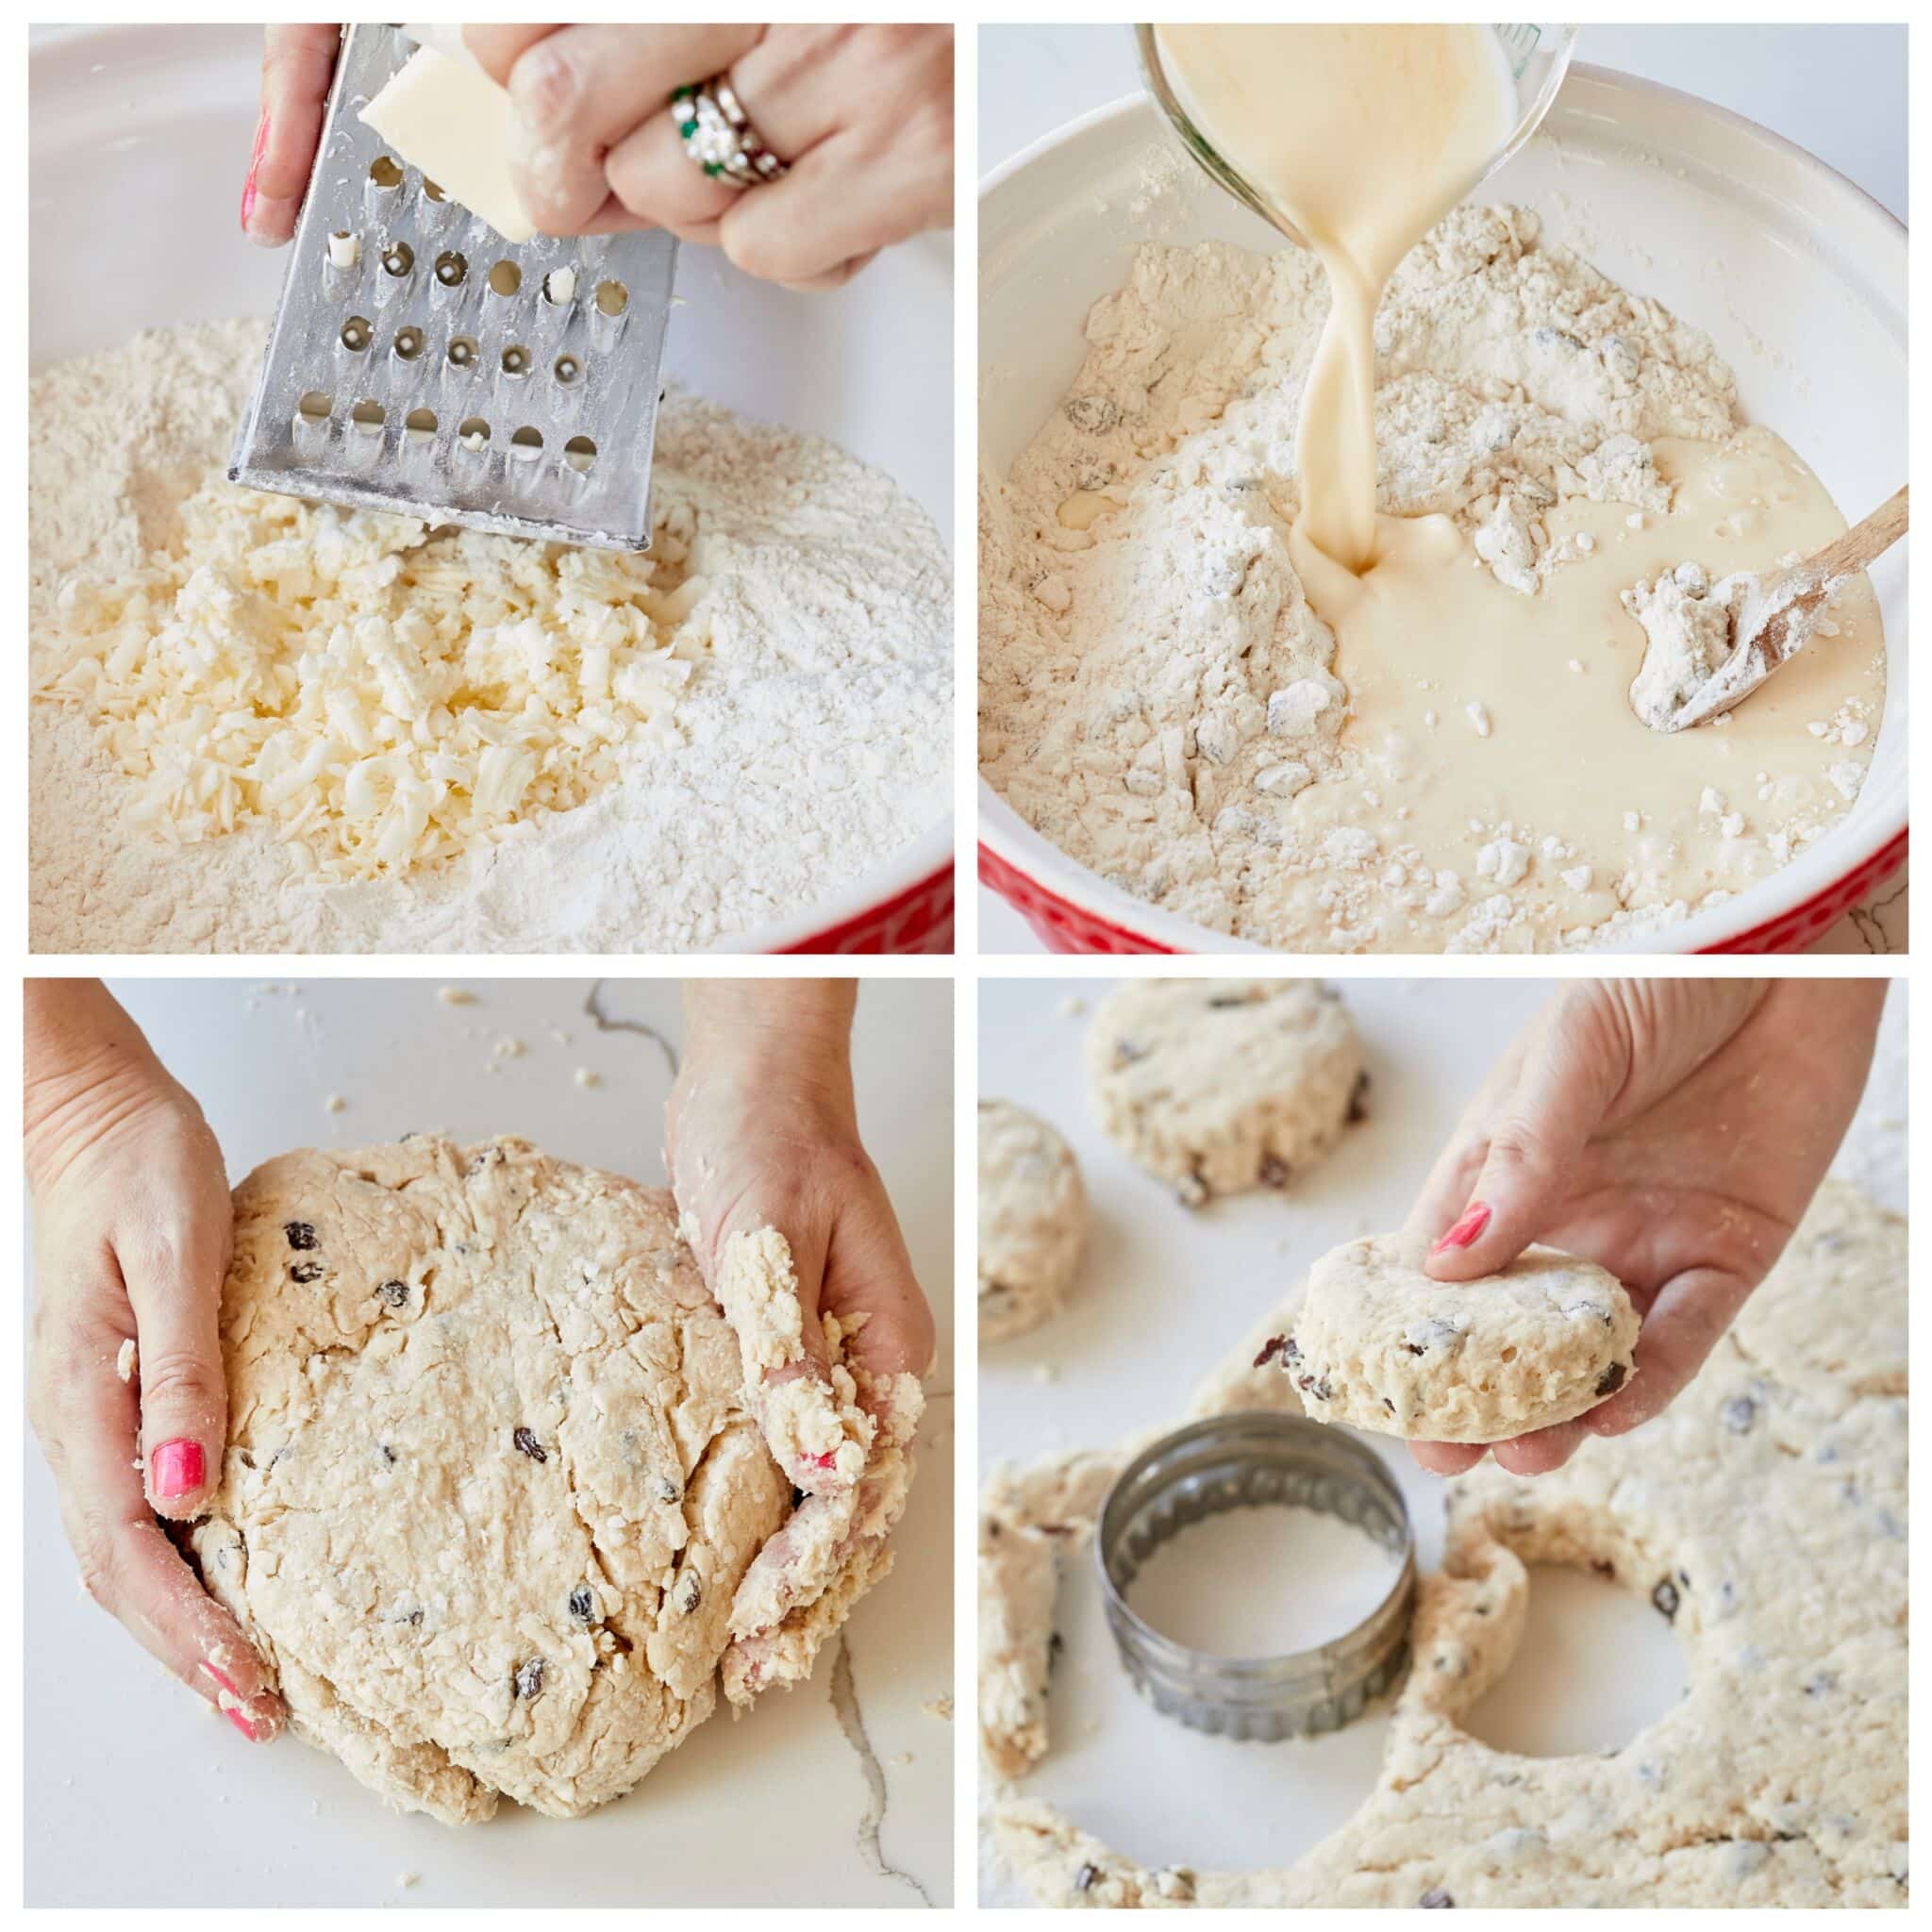 Step-by-step instructions on how to make Irish Scones: grated cold butter into the flour mix, add in milk and egg mixture, gently bring the dry and wet ingredients in to a ball. Press the dough to about 1 inch thick and cut out 3-inch circles. 